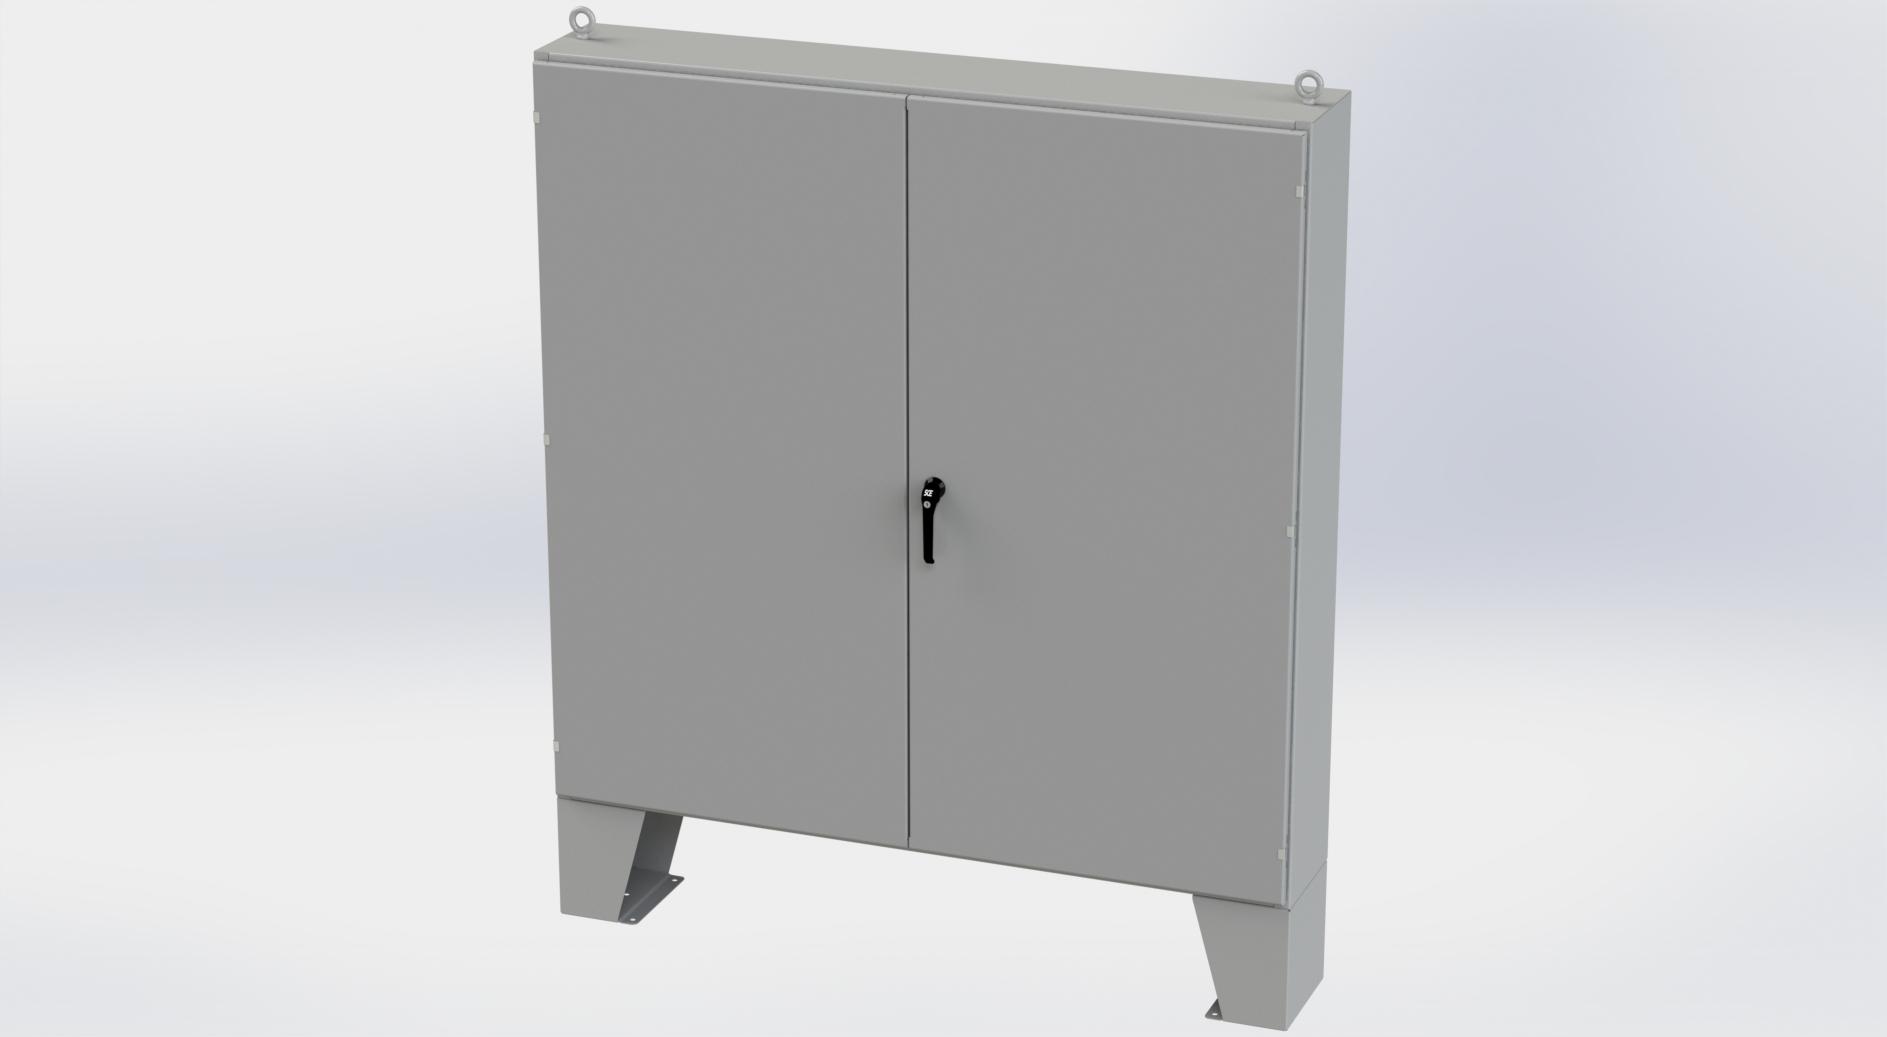 Saginaw Control SCE-727212ULP 2DR LP Enclosure, Height:72.00", Width:72.00", Depth:12.00", ANSI-61 gray powder coating inside and out. Optional sub-panels are powder coated white.